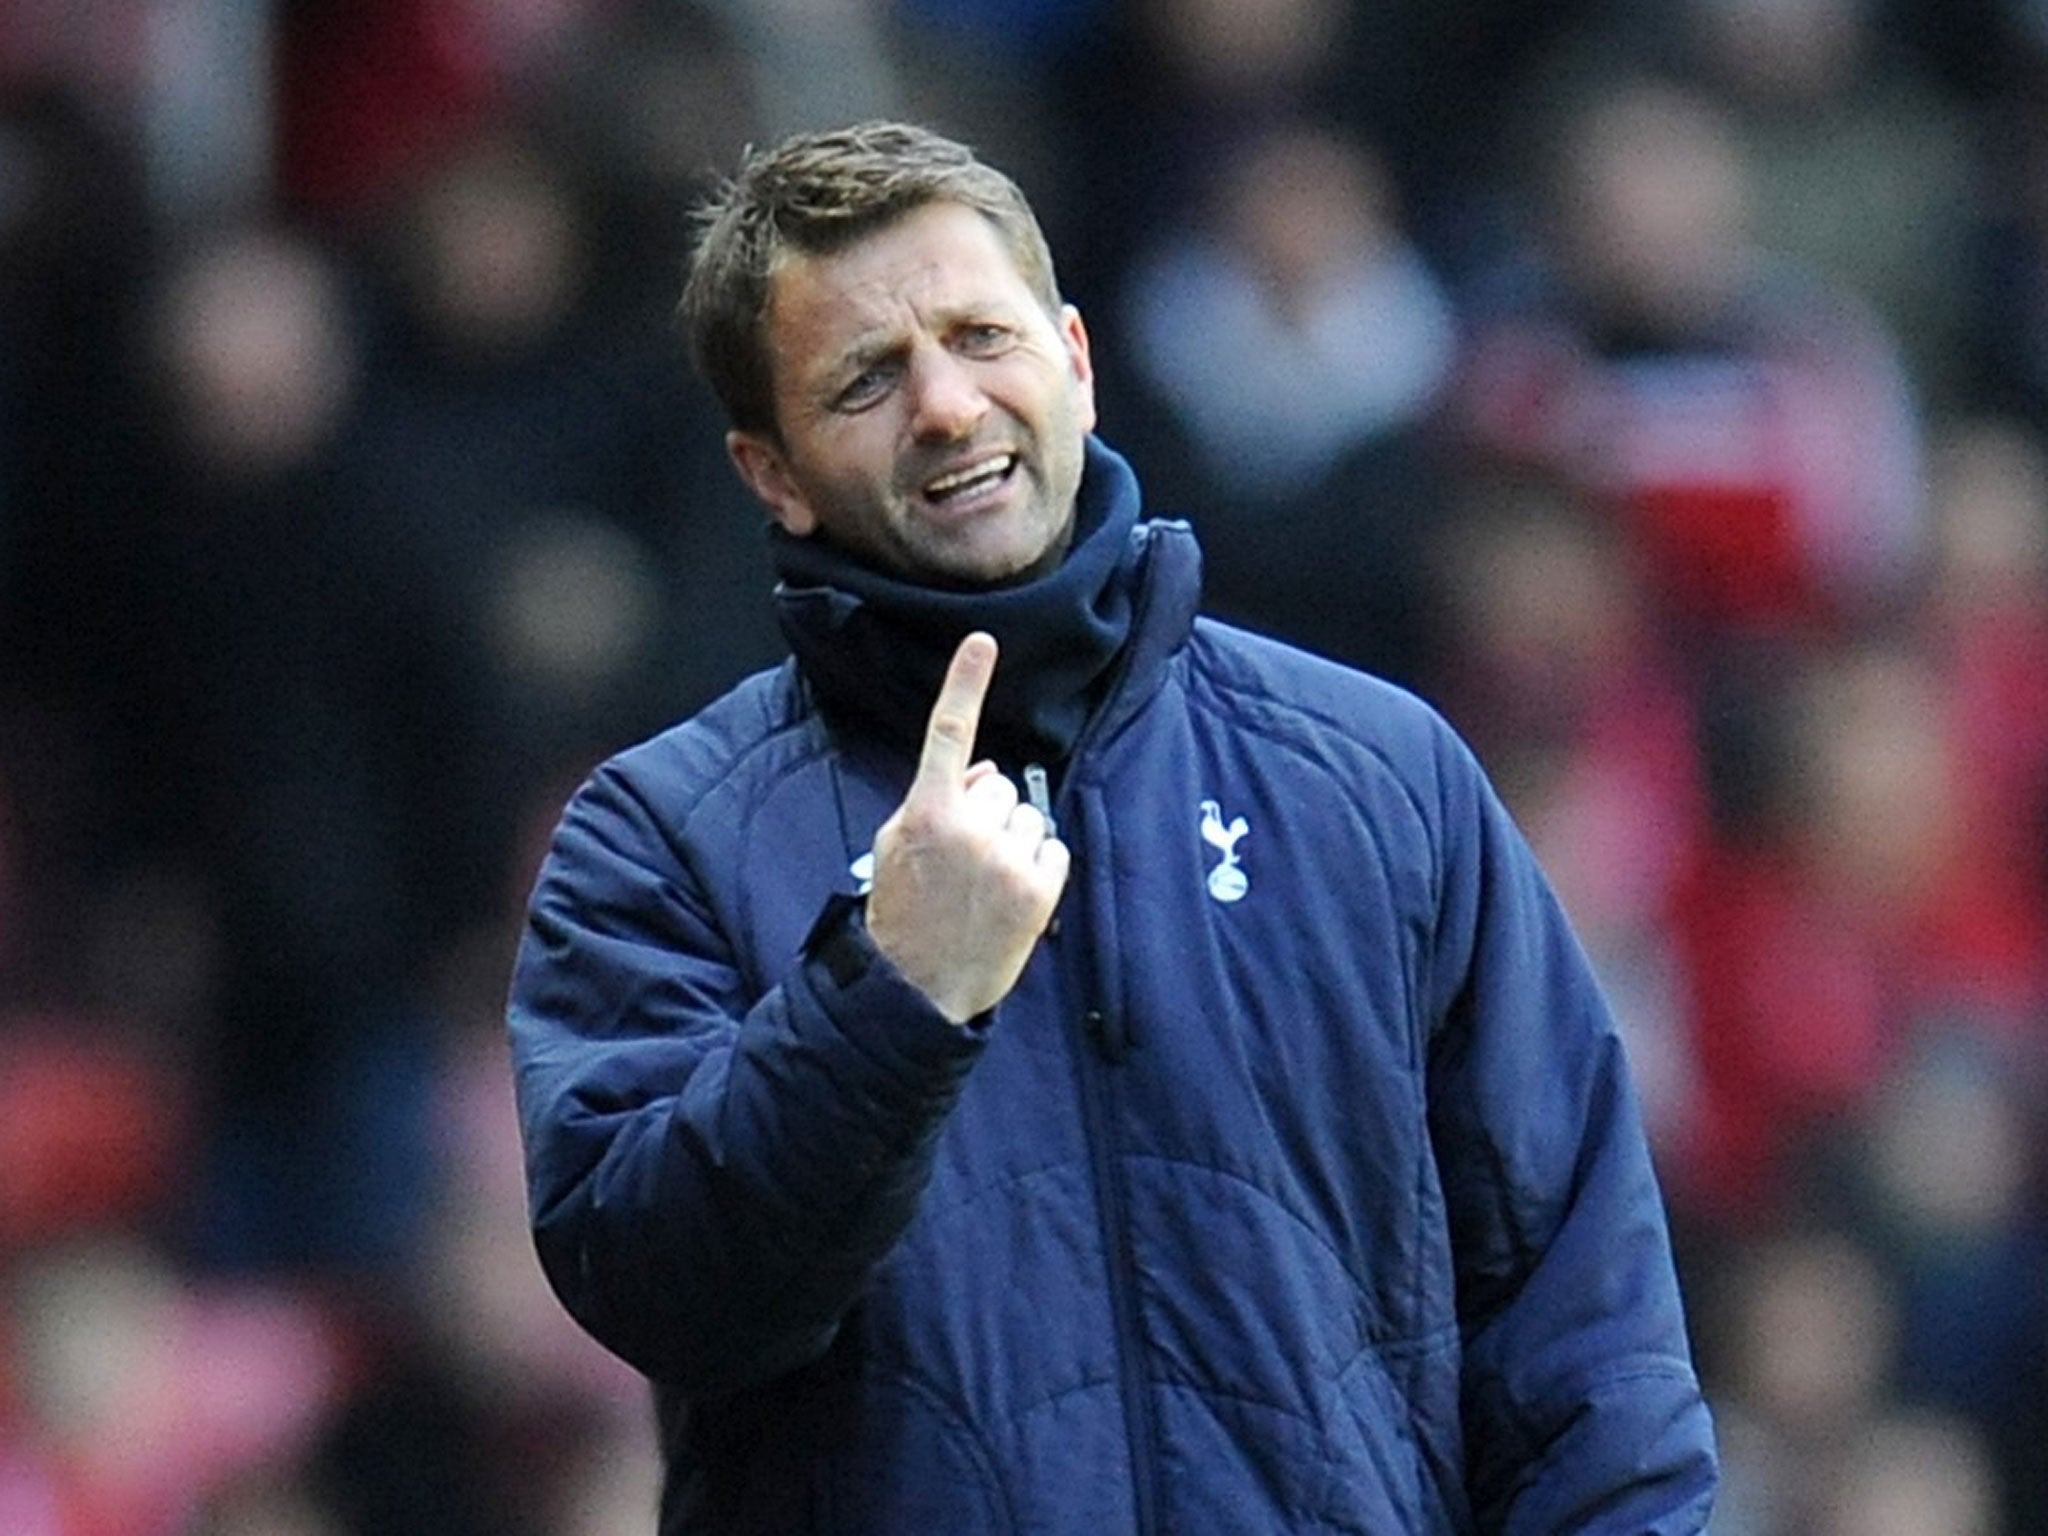 Tim Sherwood will have his first match as permanent Tottenham manager against West Brom on Boxing Day